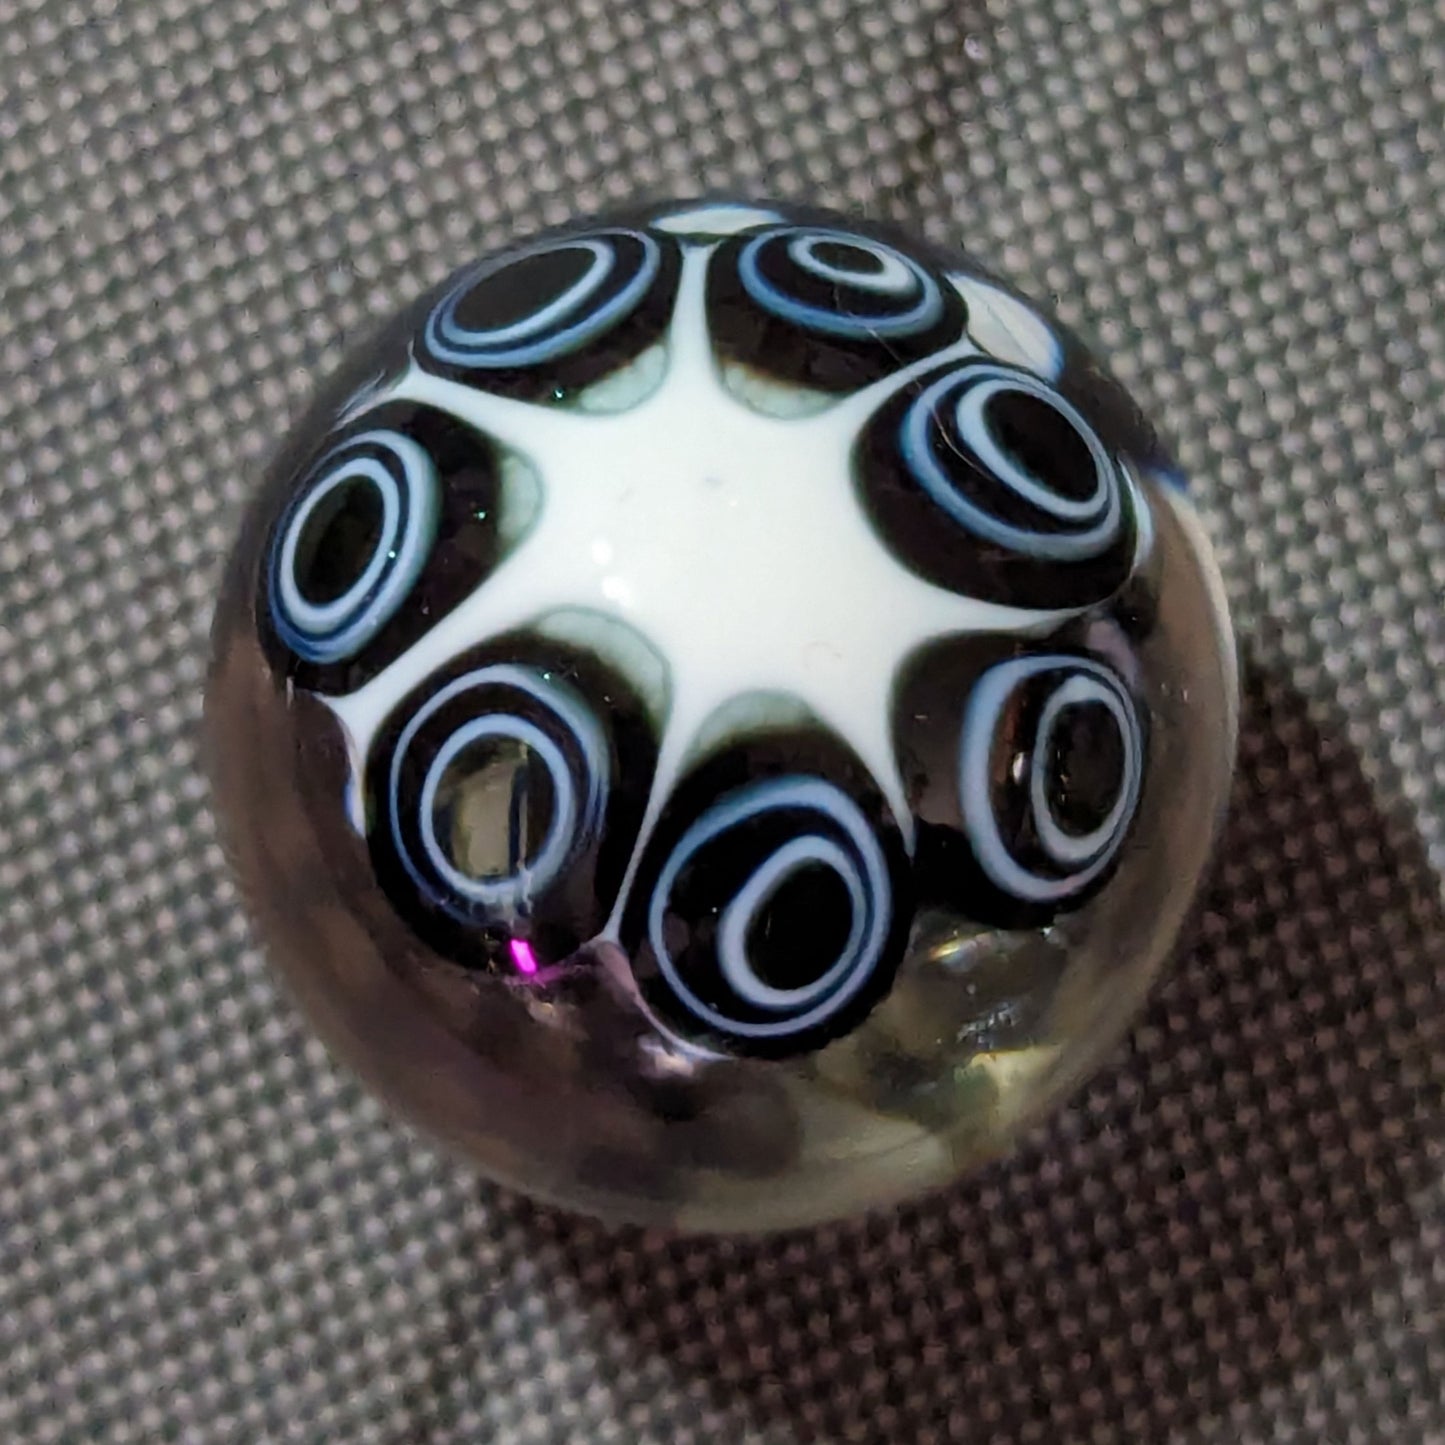 Black and White Swirl Implosion Marble